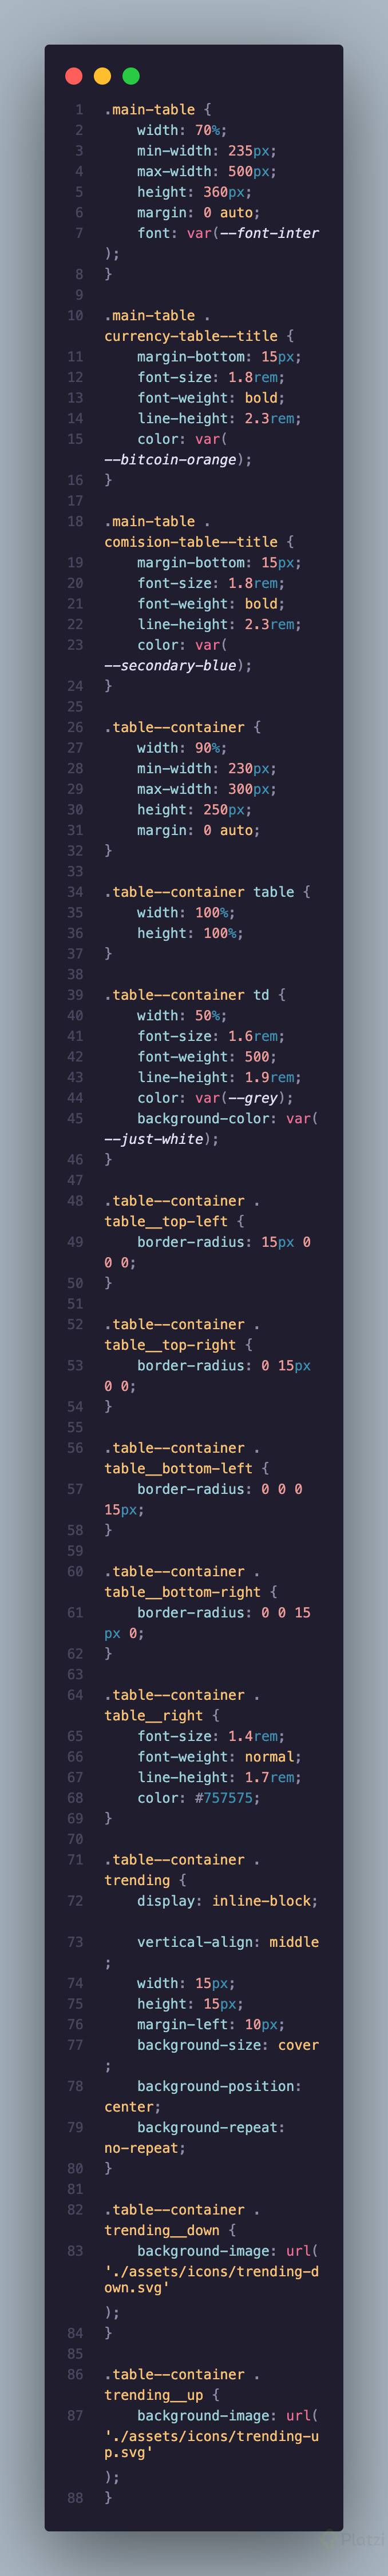 css_table-code.png